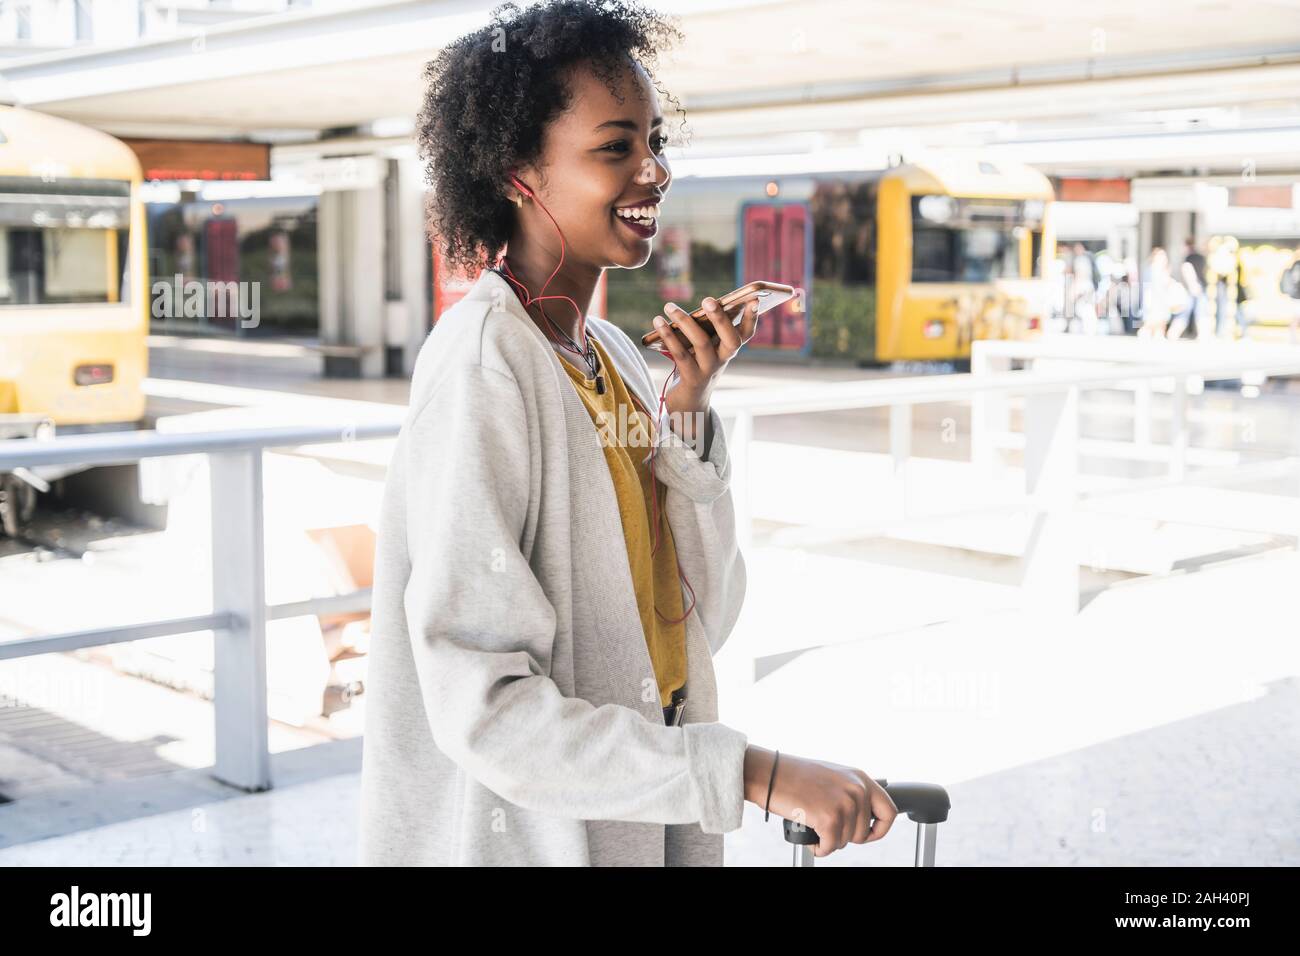 Happy young woman with earphones using smartphone at station platform Stock Photo